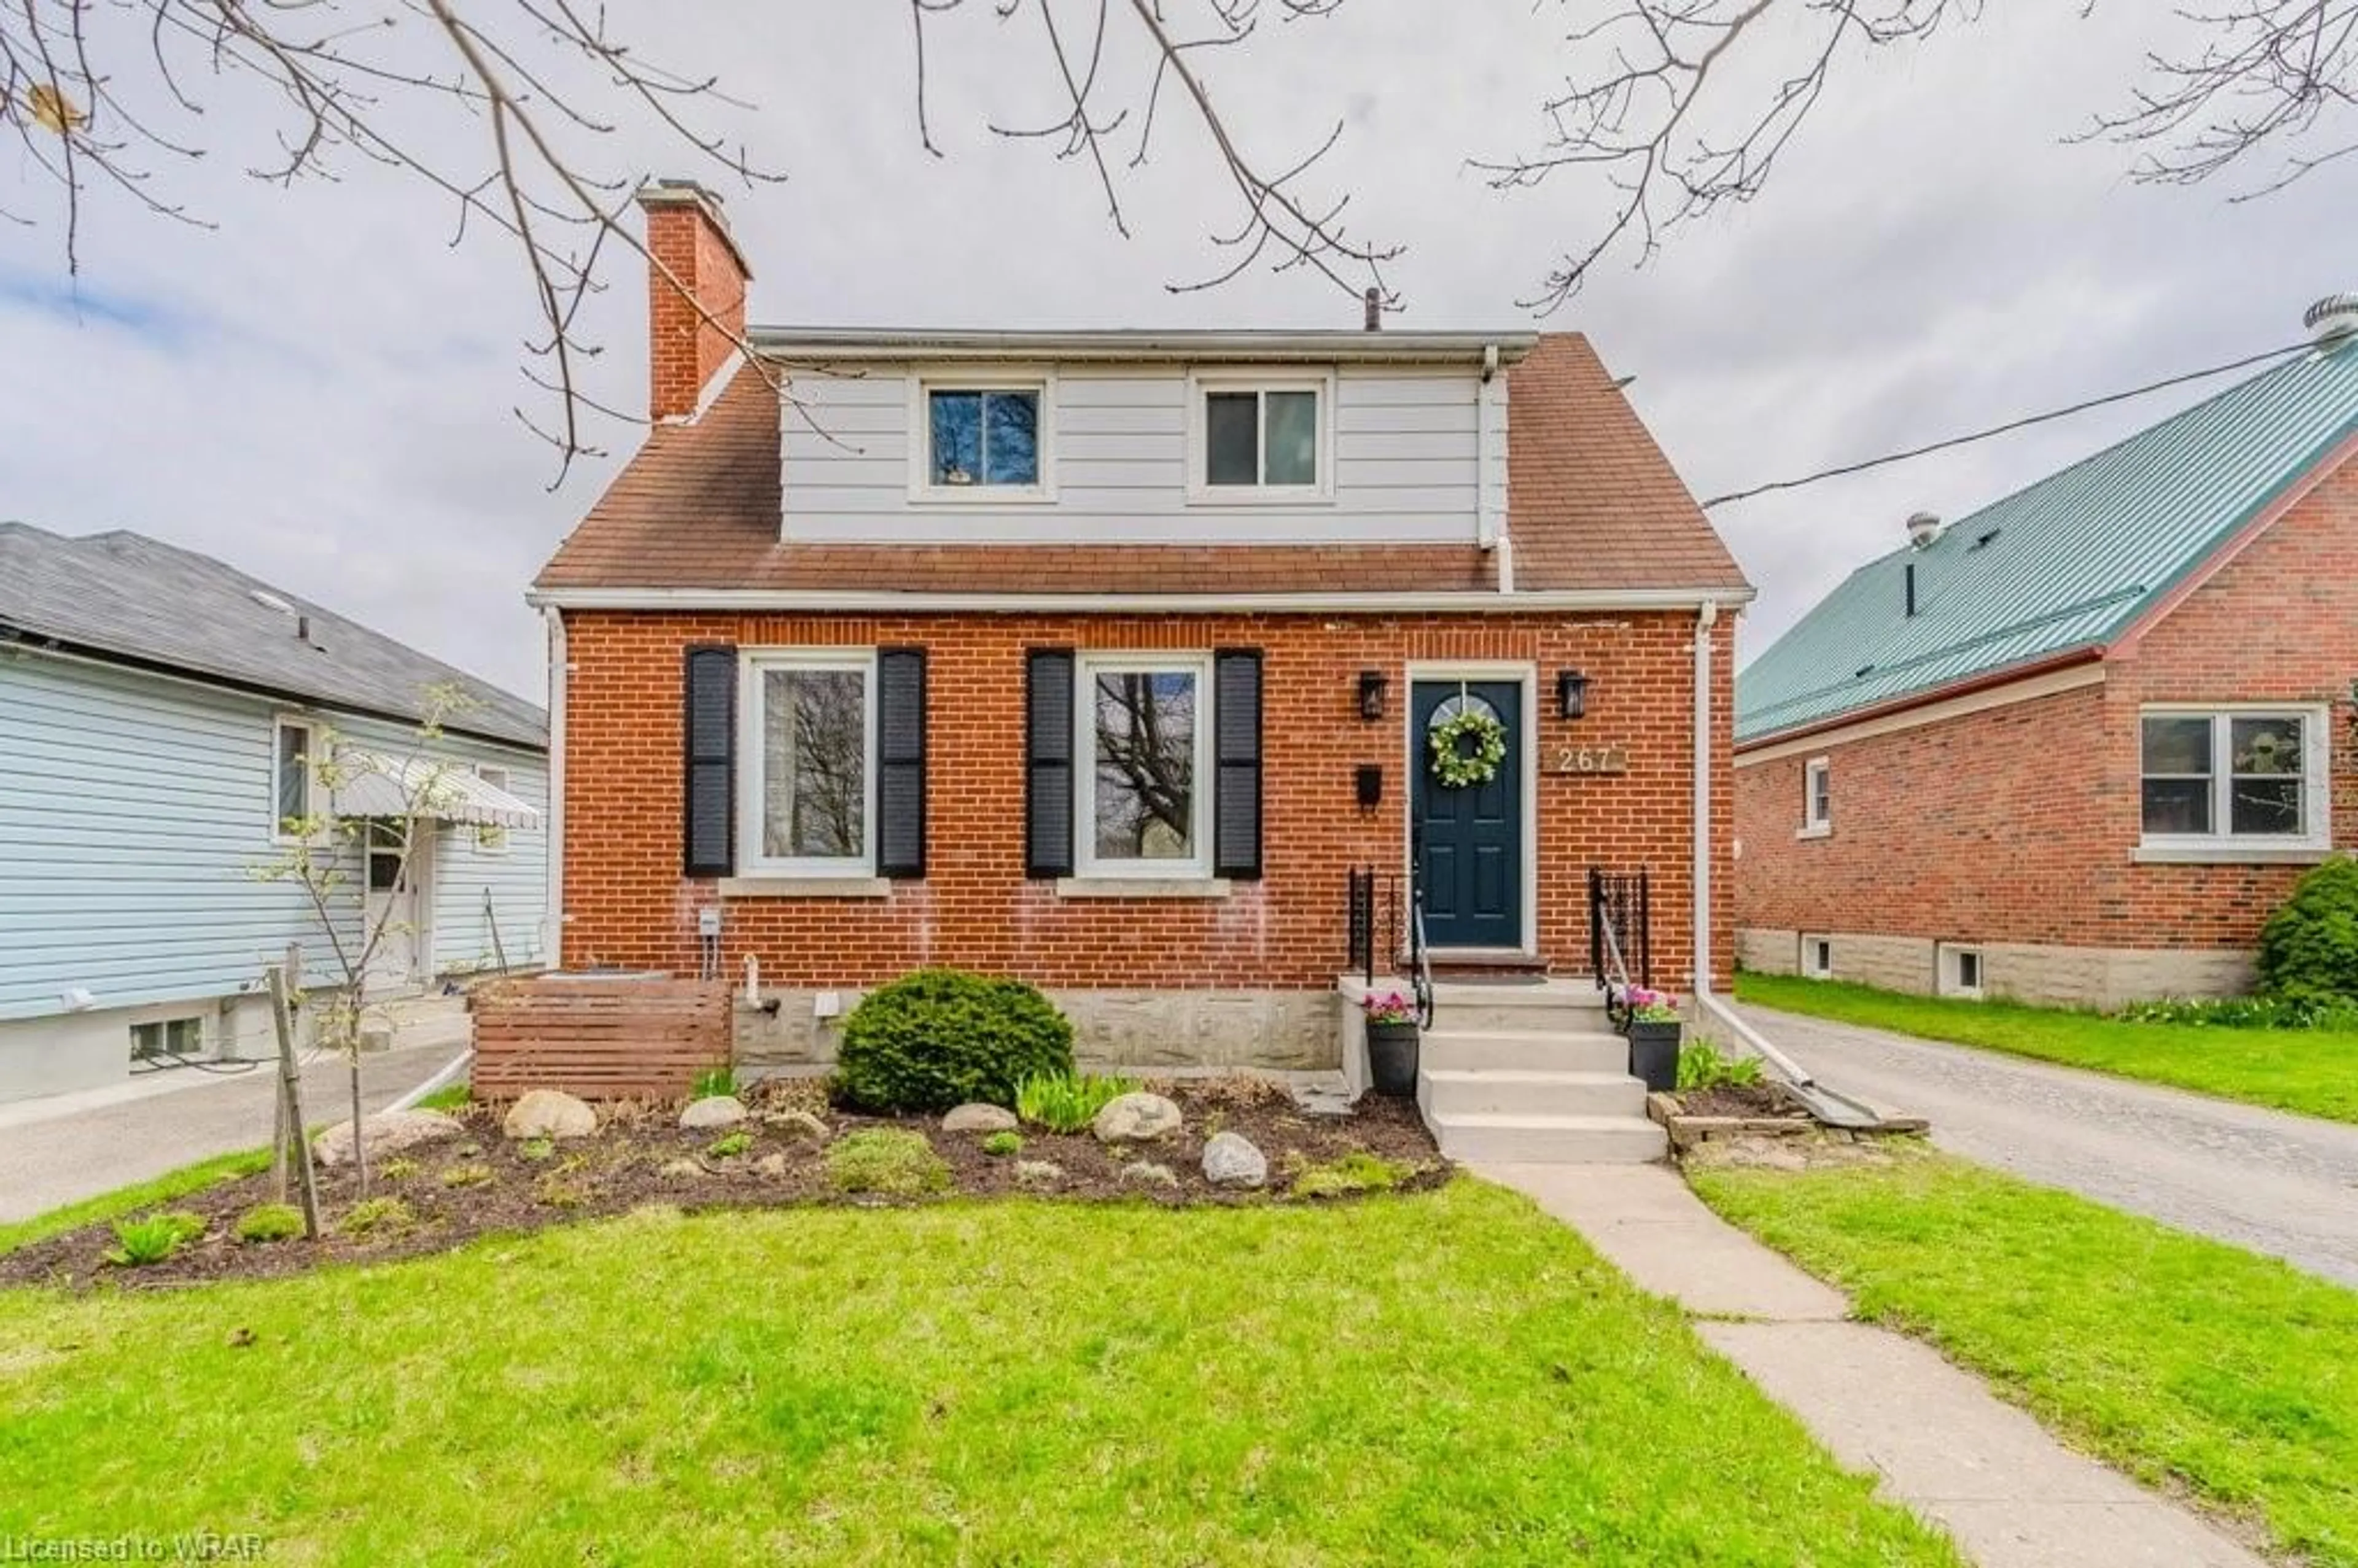 Home with brick exterior material for 267 Sydney St, Kitchener Ontario N2G 3V8